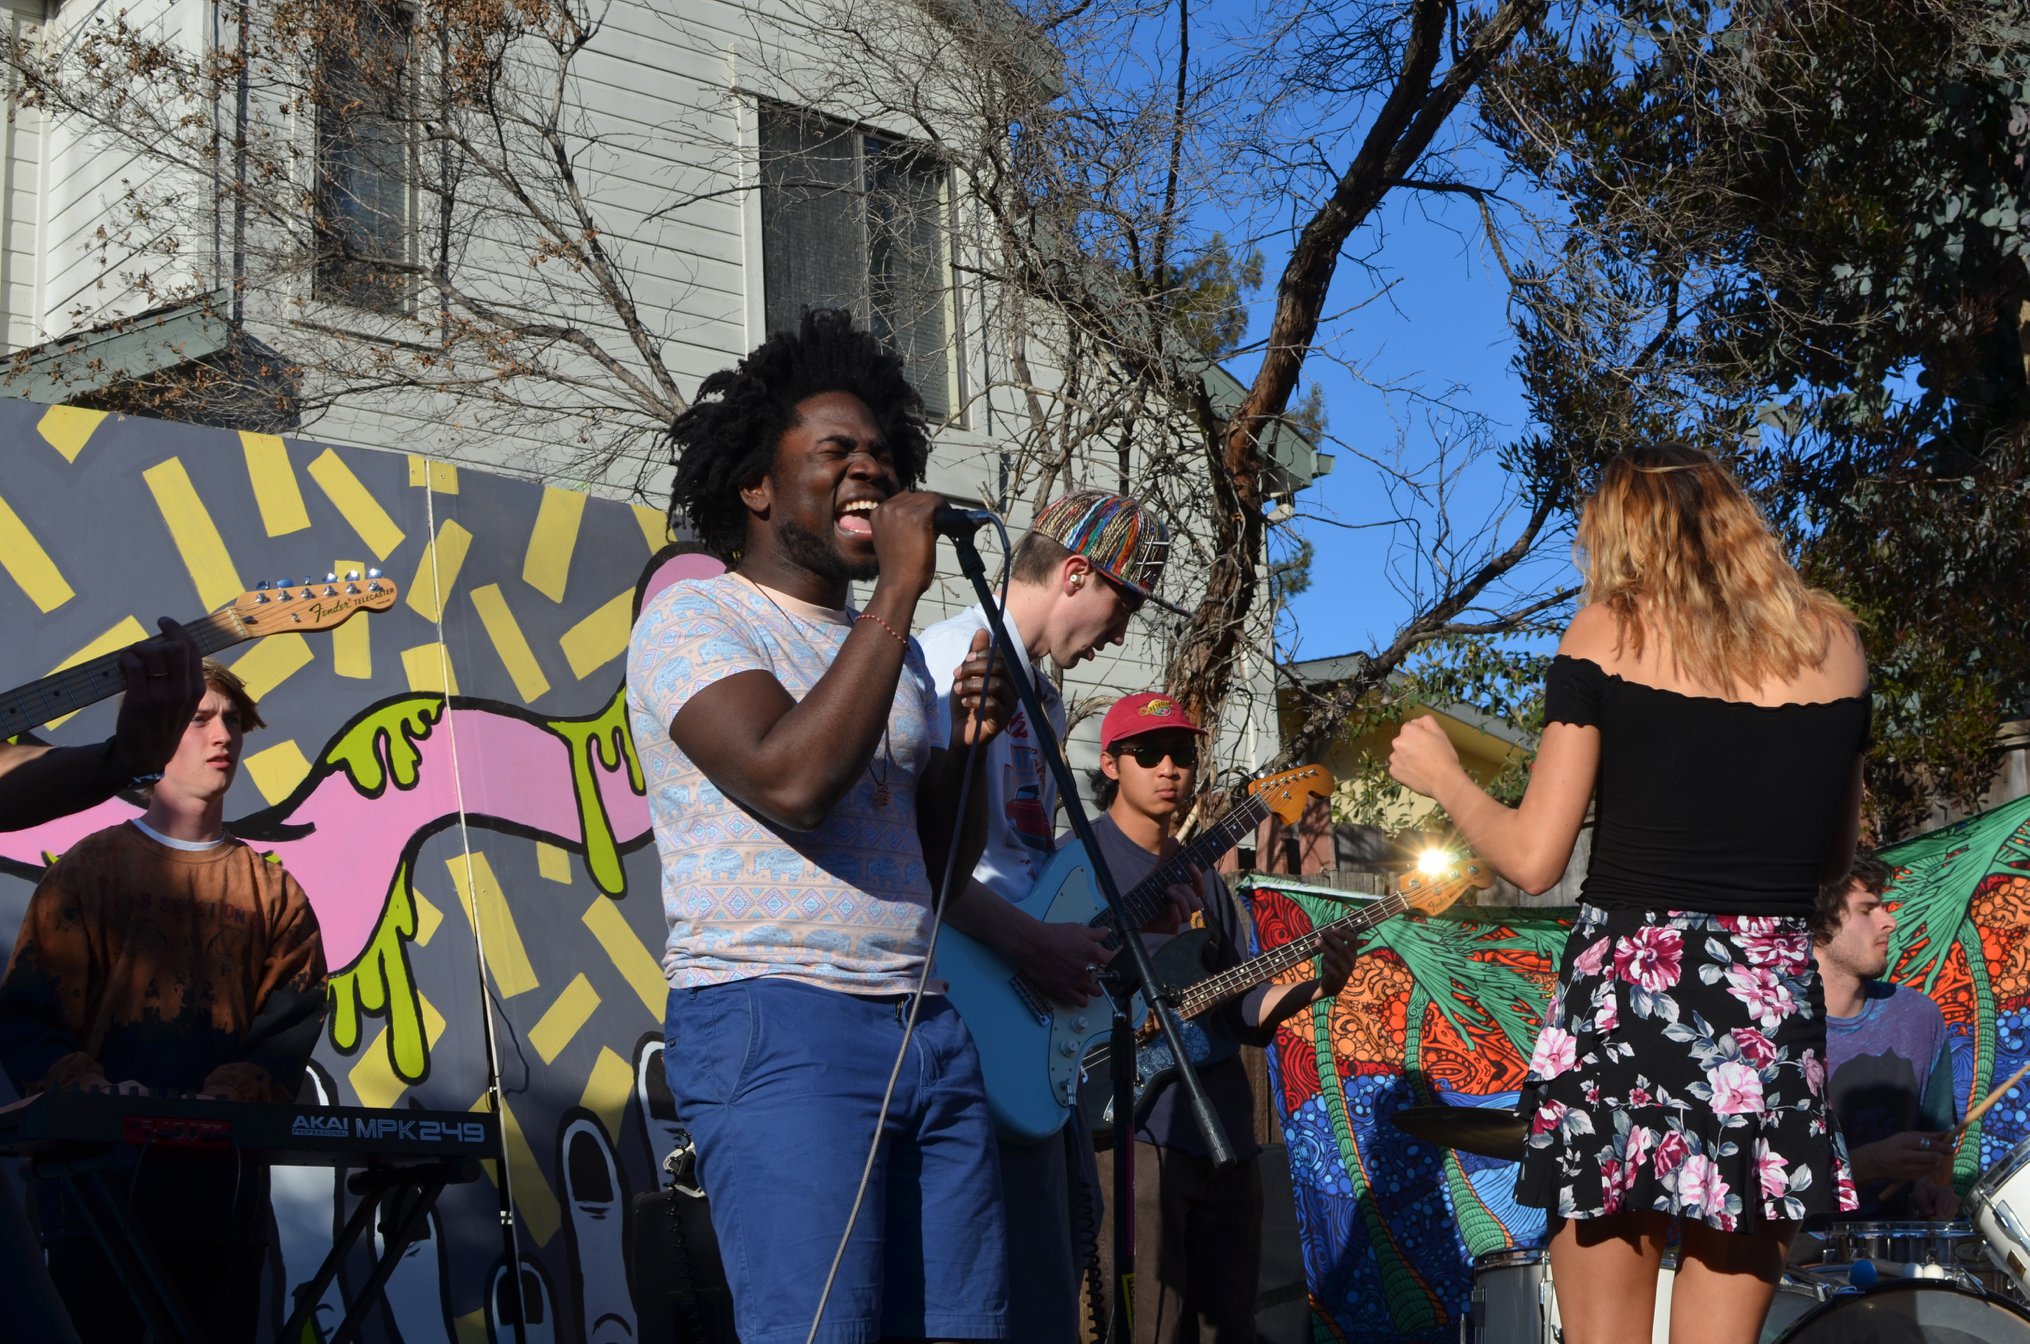 SubSessions most recent event – a Backyard Pop-up Shop, took place on March 18, 2018. The event included art and merchandise booths as well as live music. Pictured here, is a performance at the event by musician and student Hakeem Sanusi. 
 Photo Credit: Carter Harrington